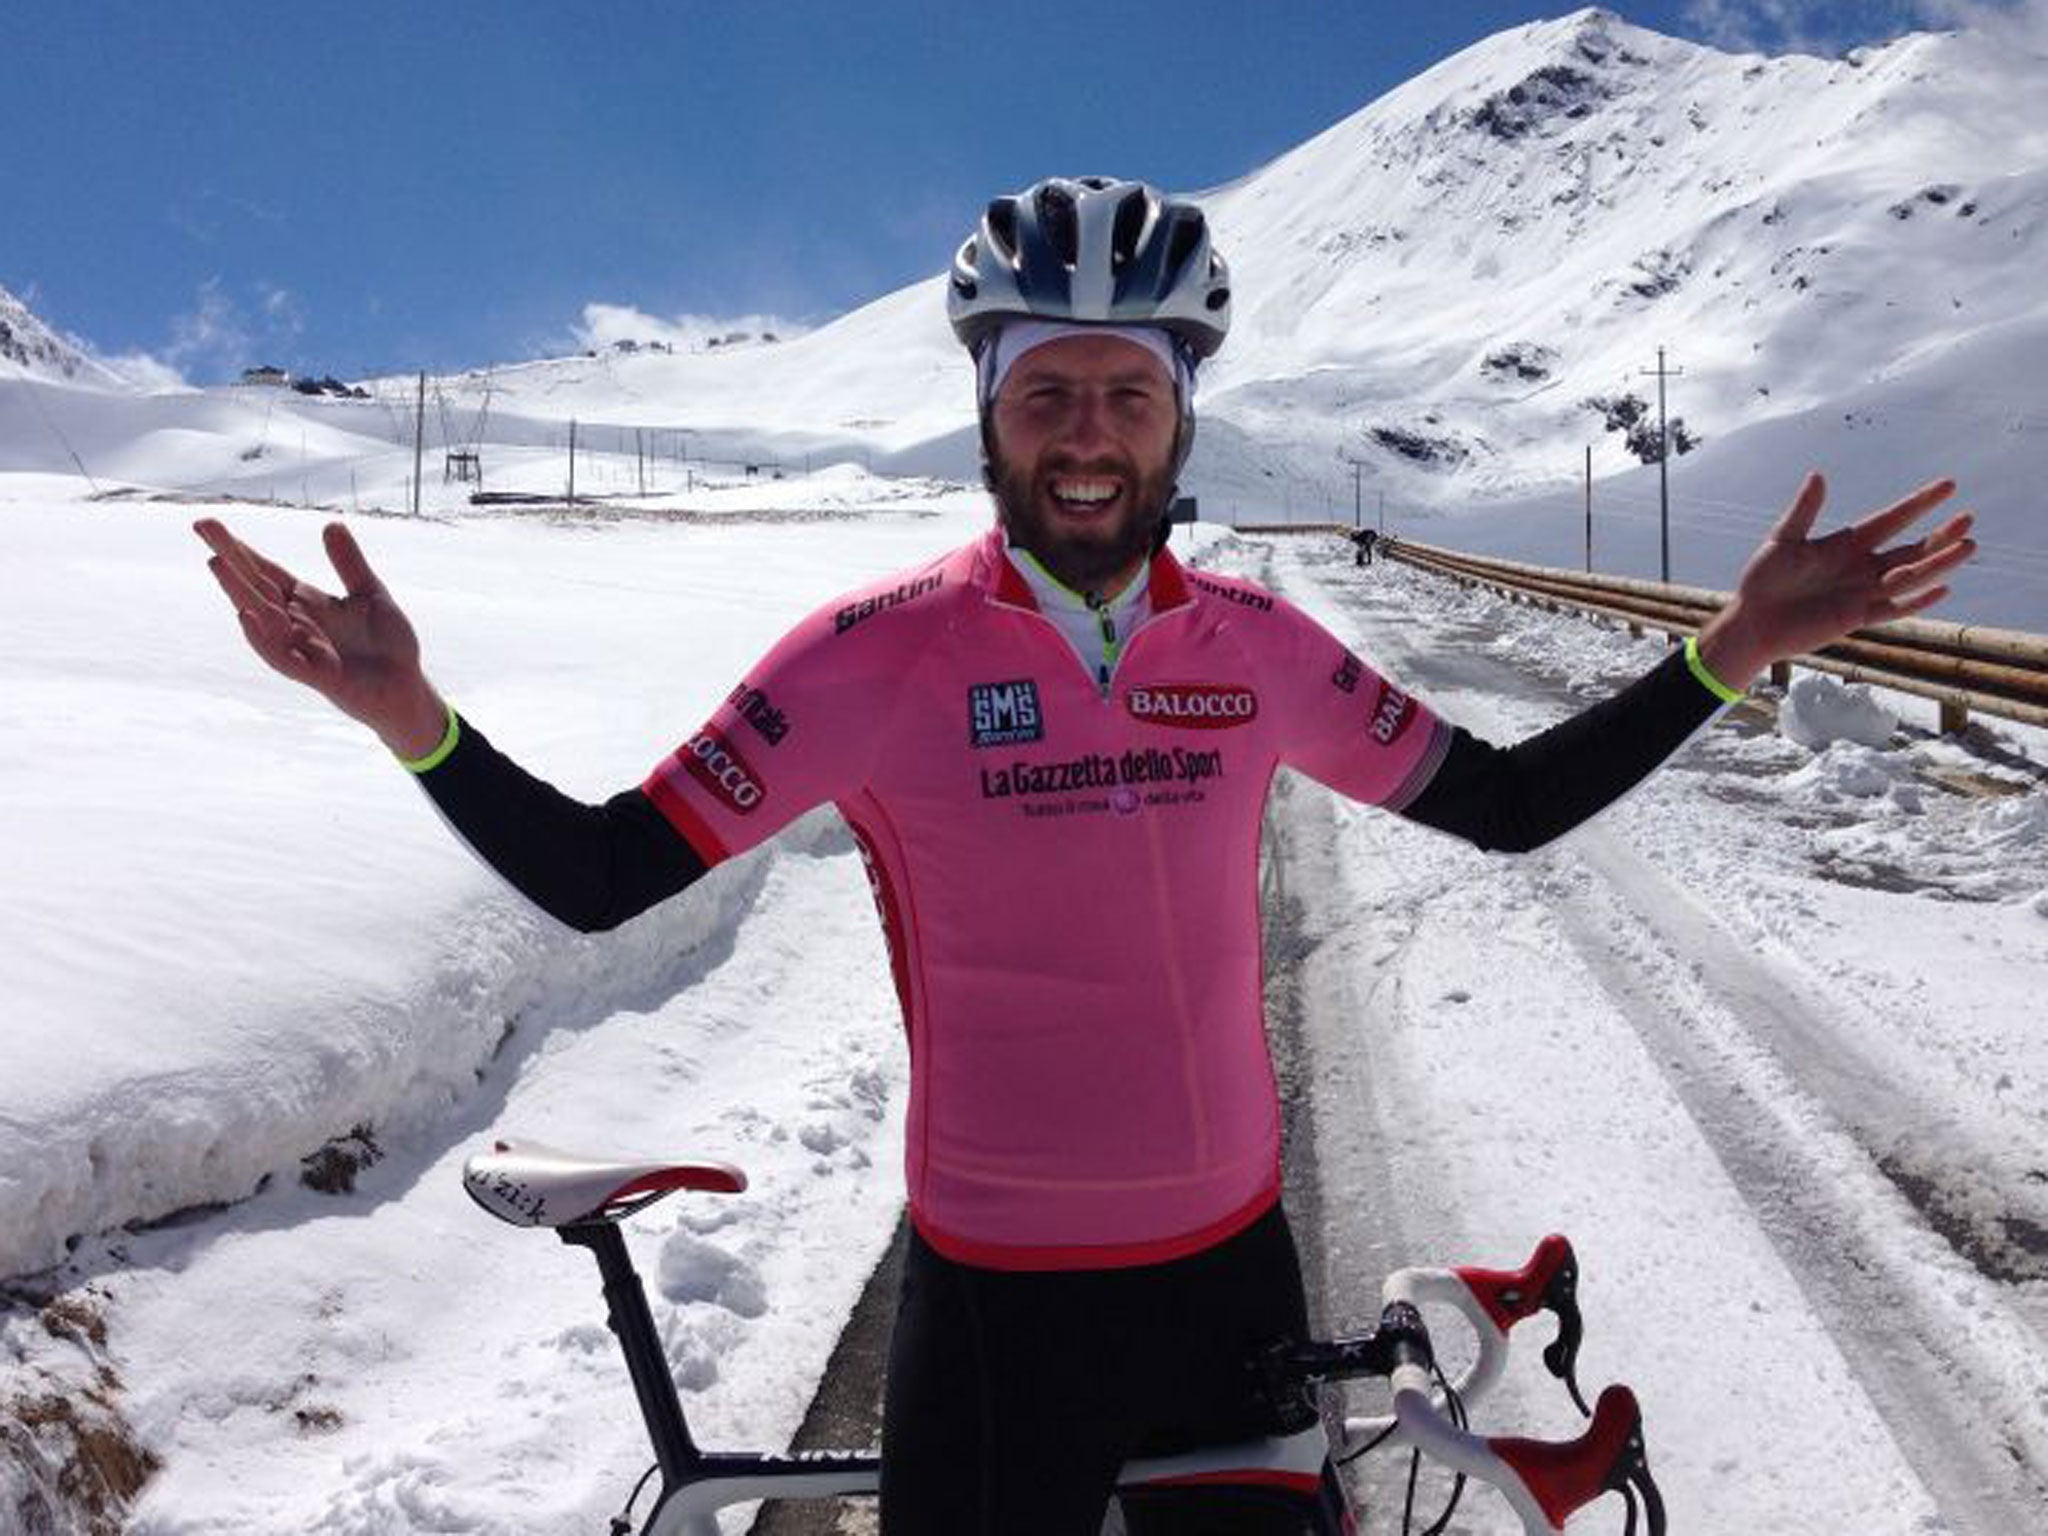 Simon Usborne takes on the snow, the endless hairpin bends of the Stelvio Pass and tries on the pink jersey of the Giro leader